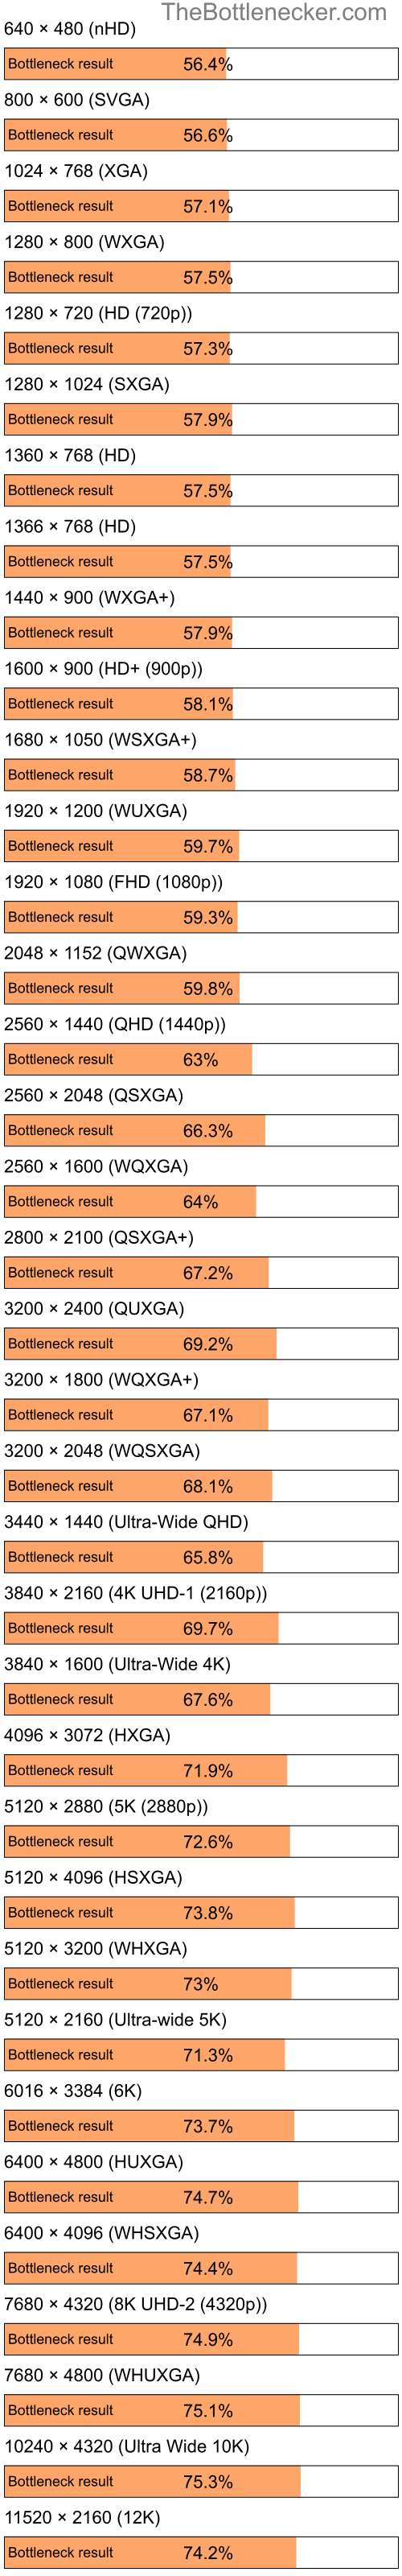 Bottleneck results by resolution for Intel Pentium 4 and NVIDIA GeForce 9500M GS in General Tasks